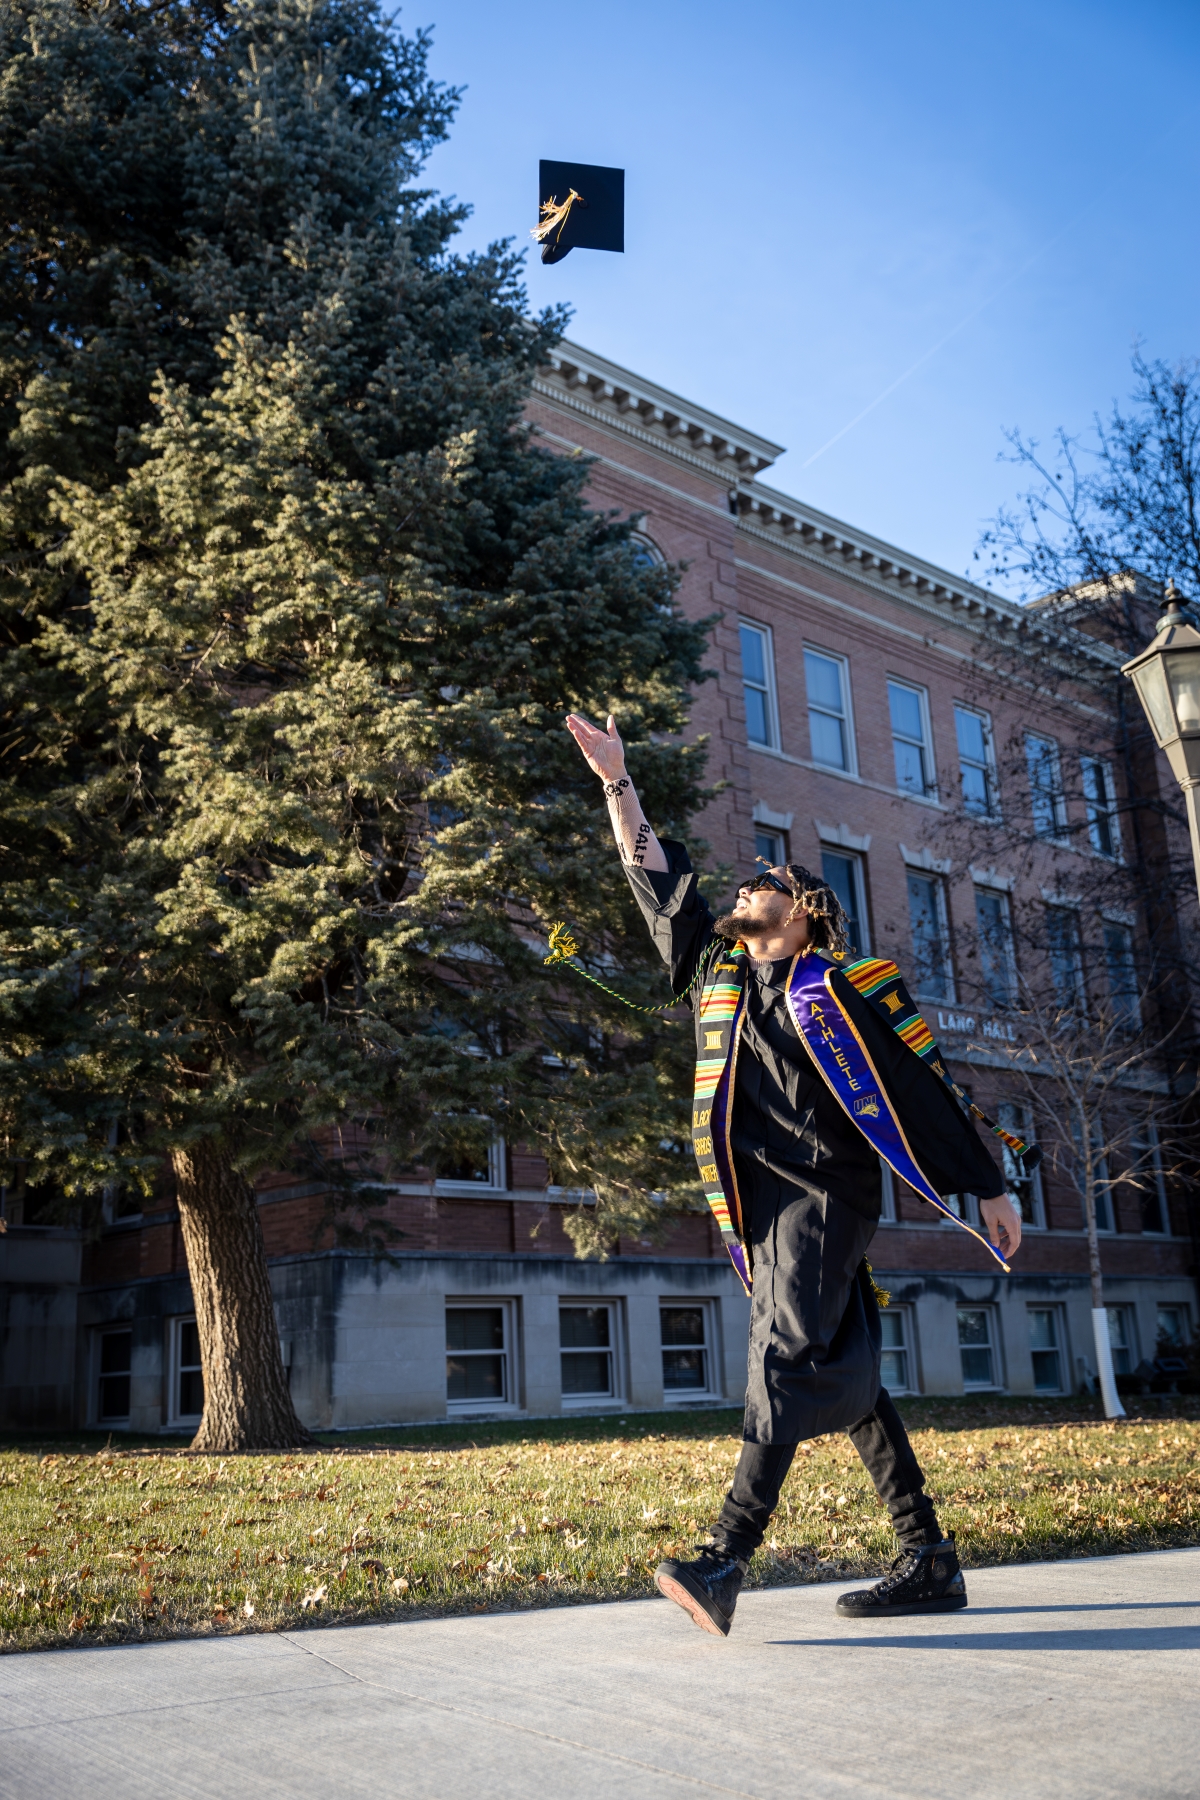 Woo Governor walking on UNI campus in graduation gown, throwing cap in the air